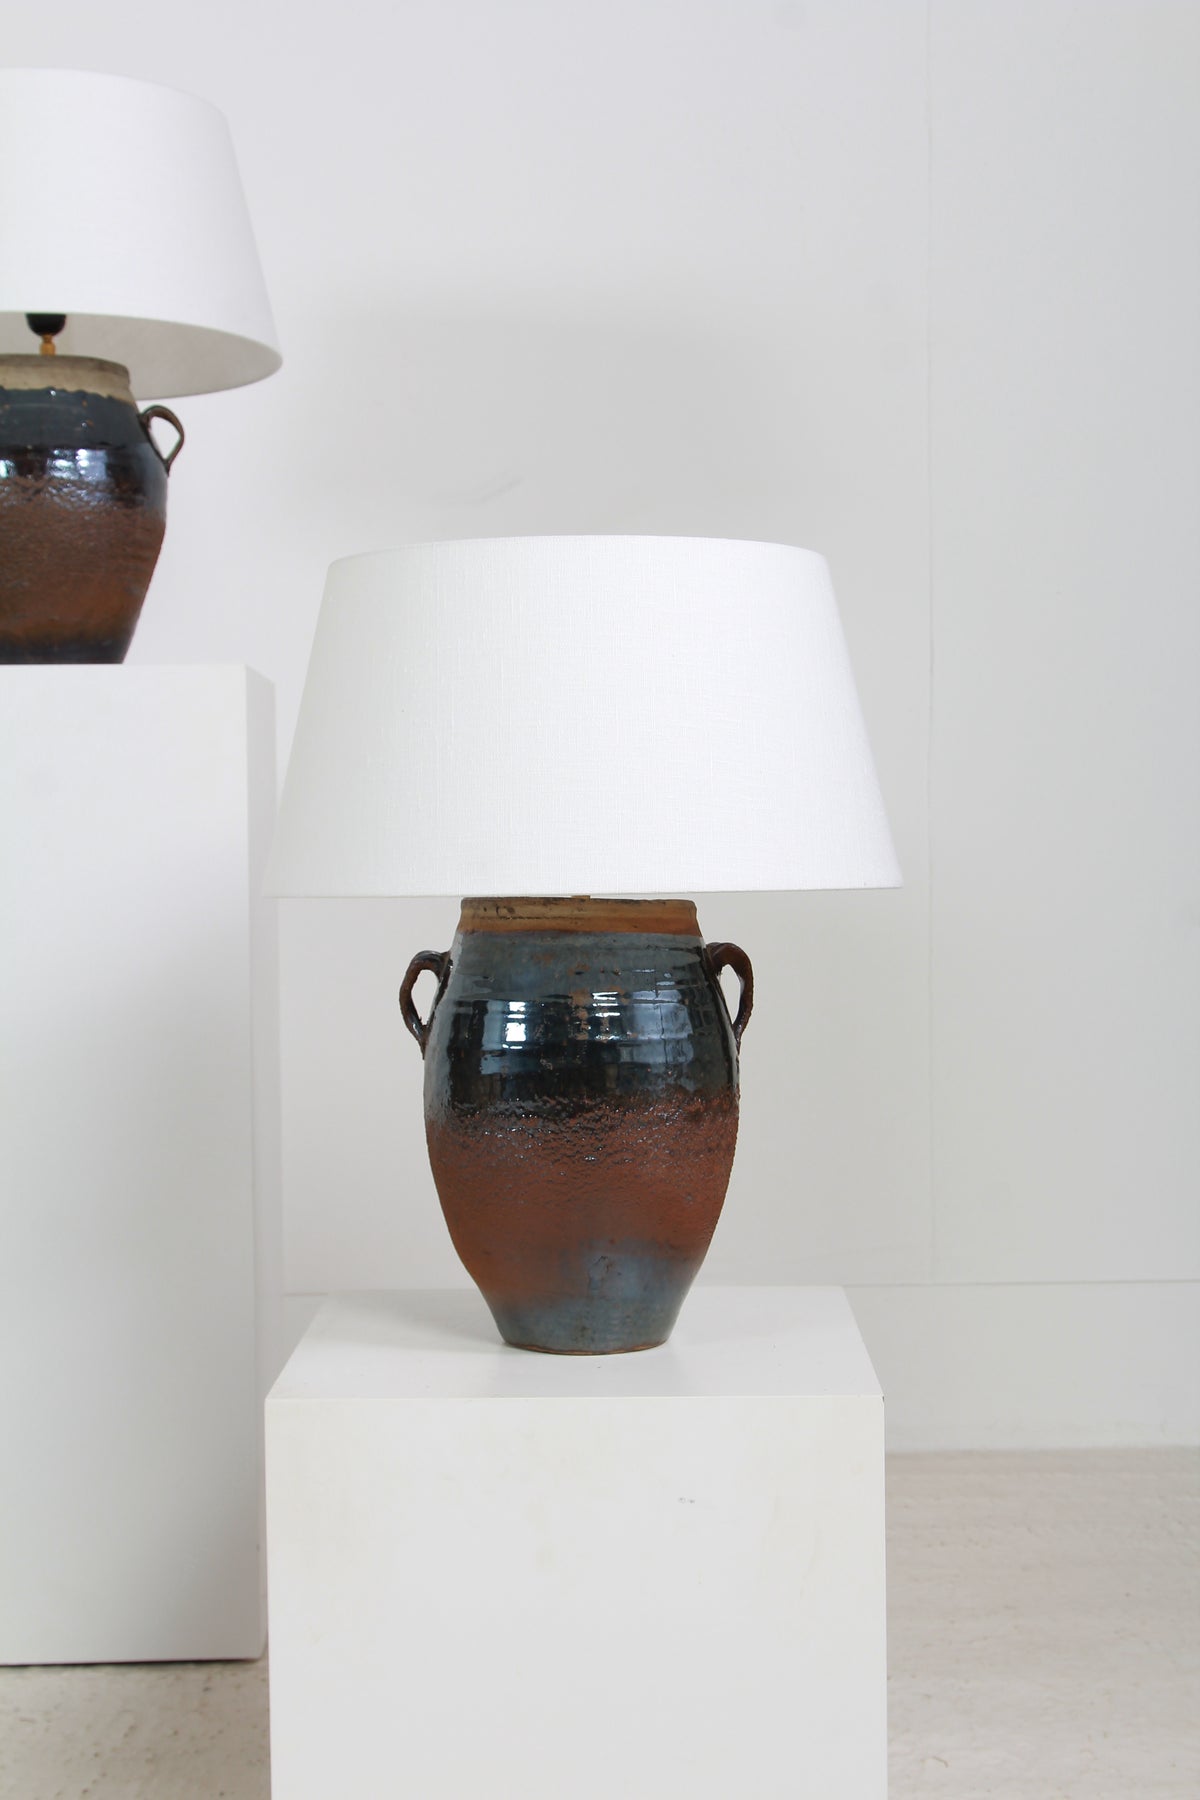 AUTHENTIC Near PAIR OF DARK GLAZED OIL POT TABLE LAMPS WITH NATURAL LINEN EMPIRE SHADES